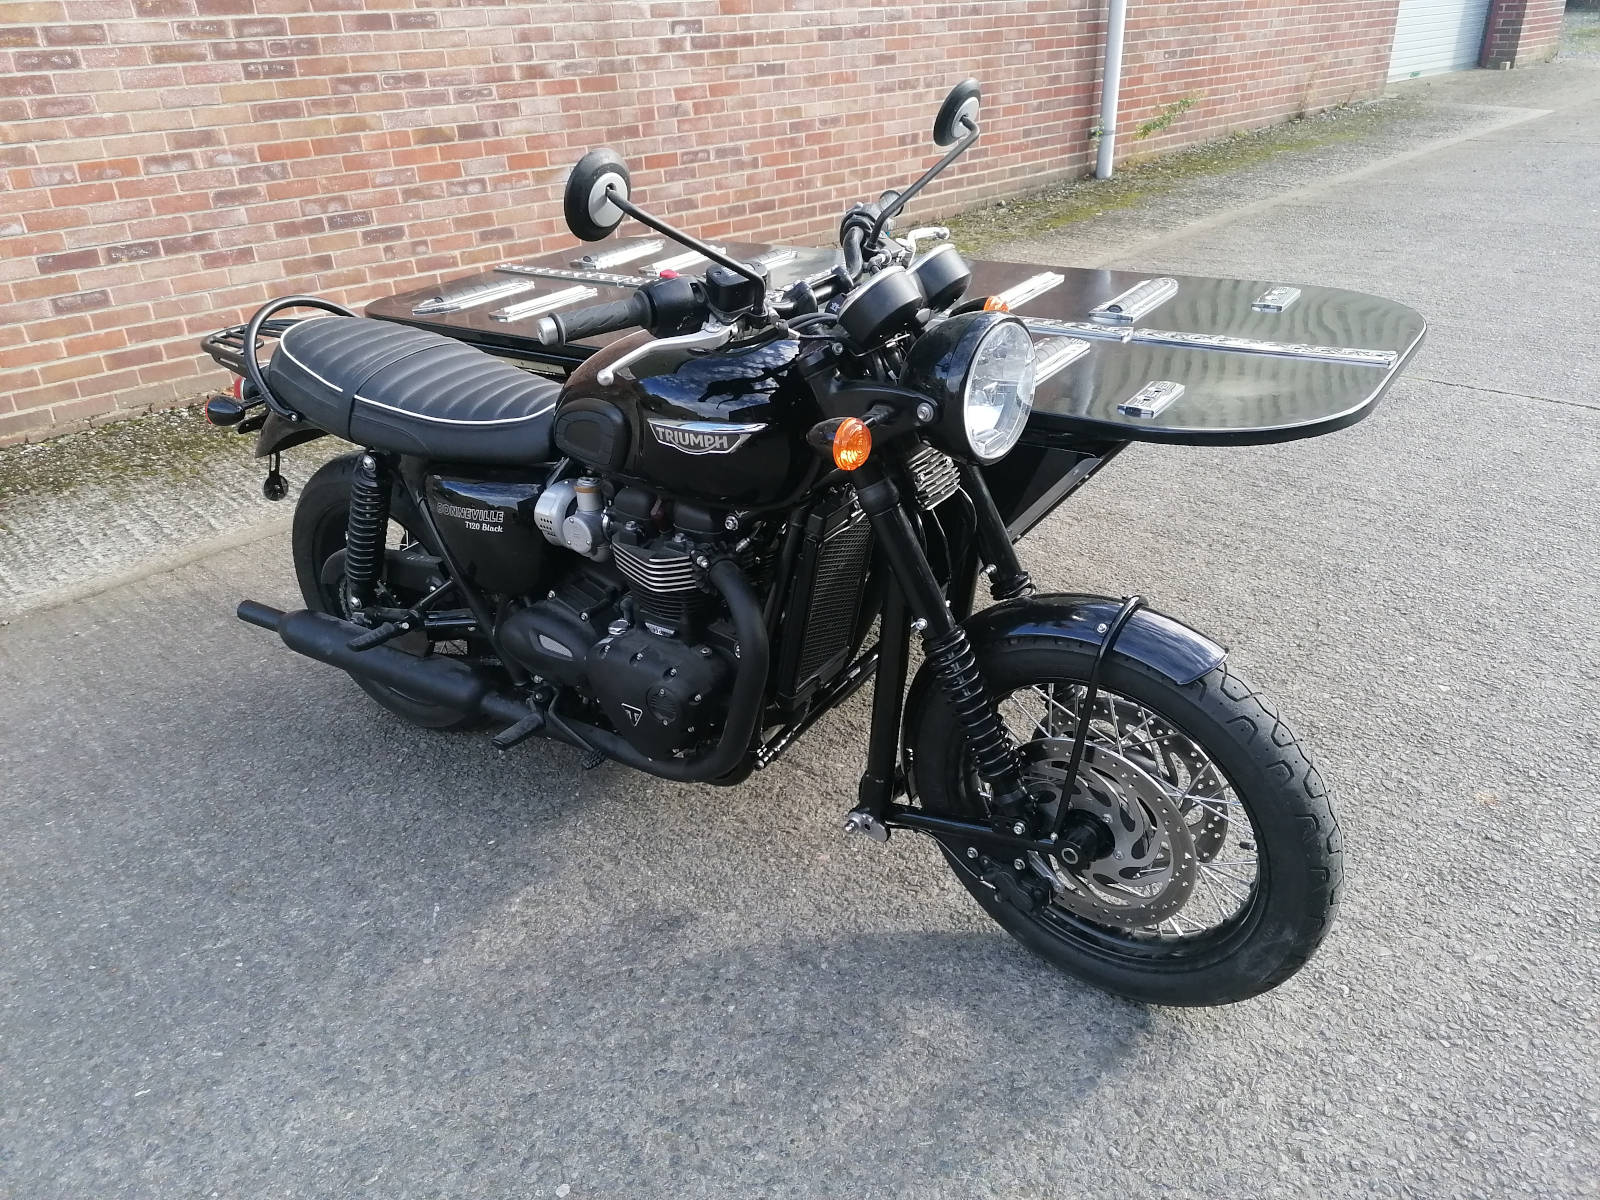 Image linking to the Triumph Bonneville Hearse Outfit page for details of  and the  on offer there: Follow the project to build a one-off hearse sidecar fitted to a Triumph Bonneville.